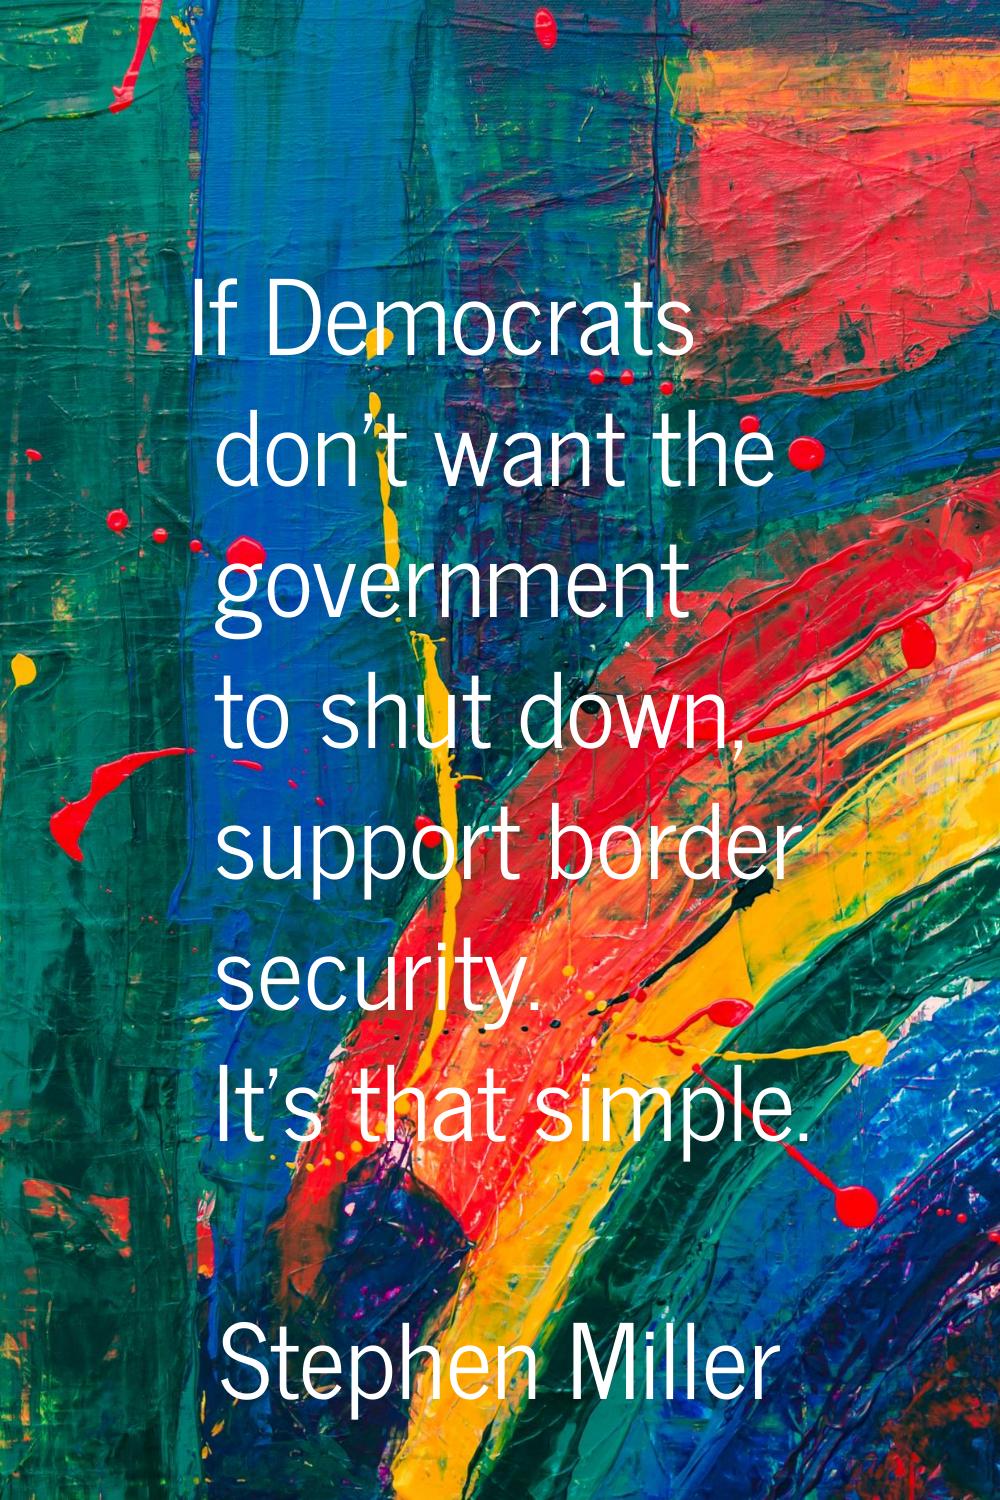 If Democrats don't want the government to shut down, support border security. It's that simple.